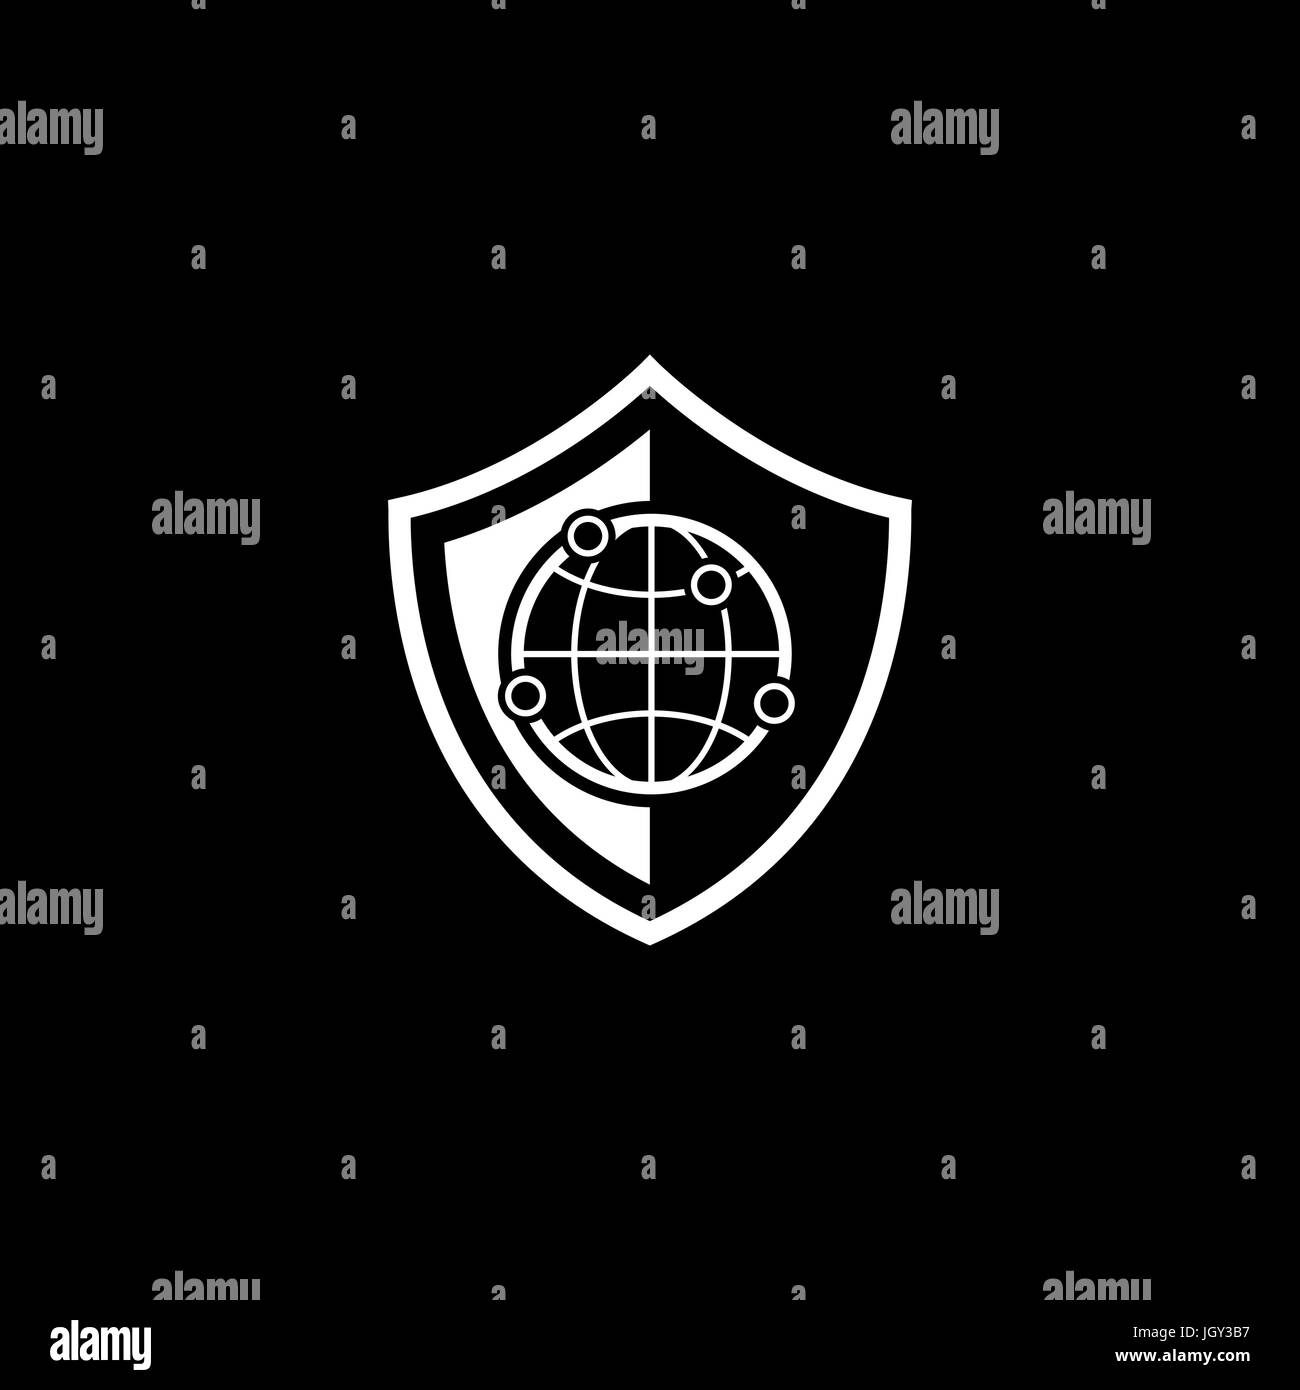 Network Security Icon. Flat Design. Stock Vector